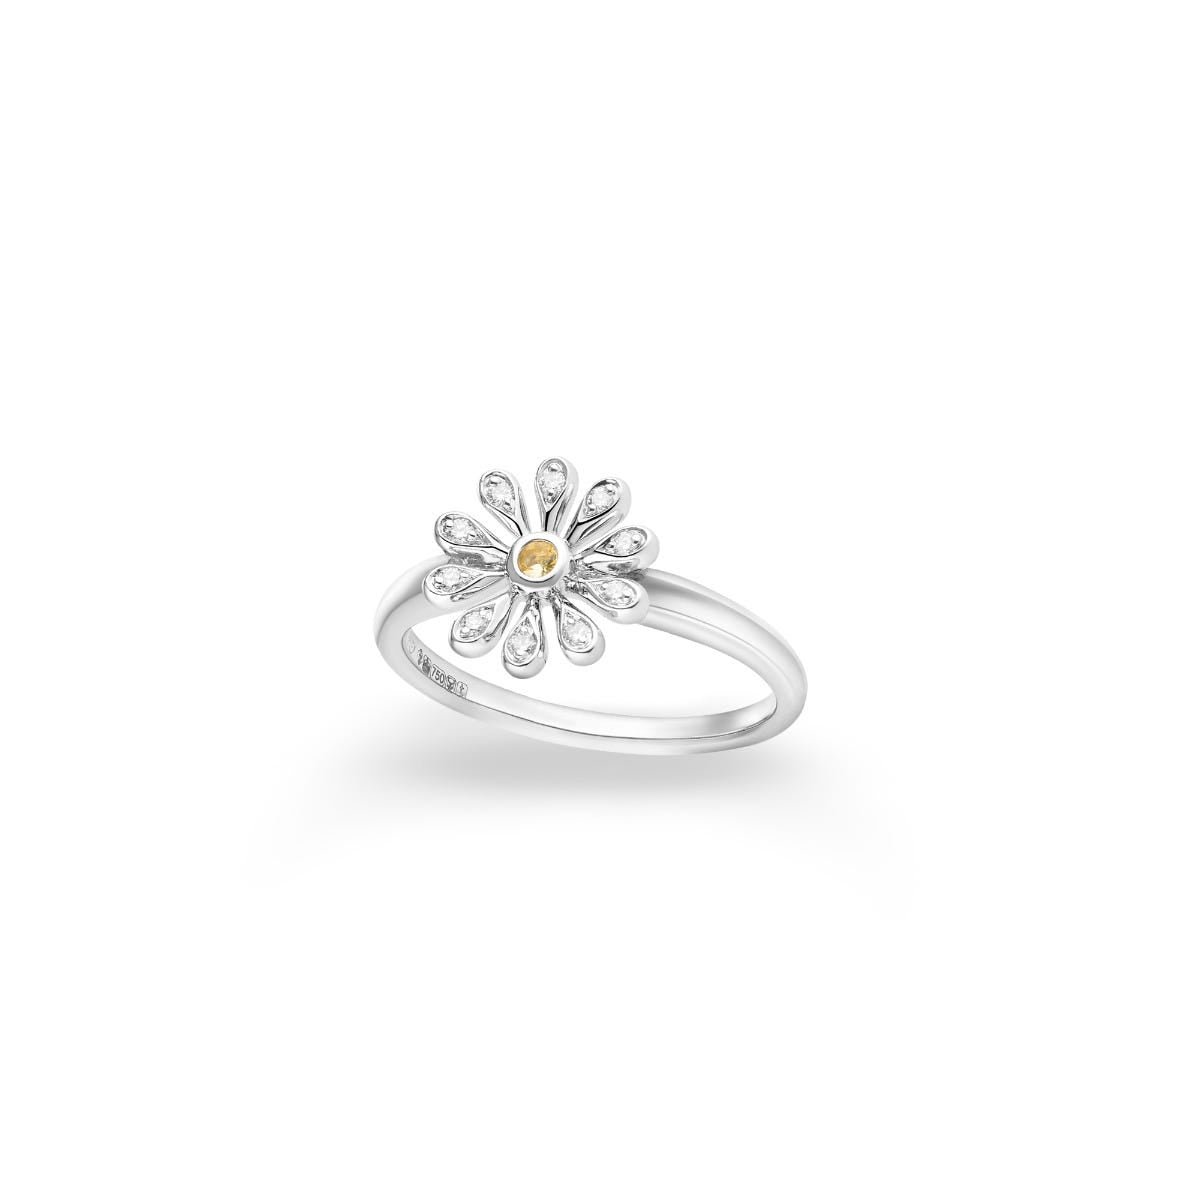 Mini Daisy Ring in 18ct White Gold with Yellow Sapphire and Diamonds